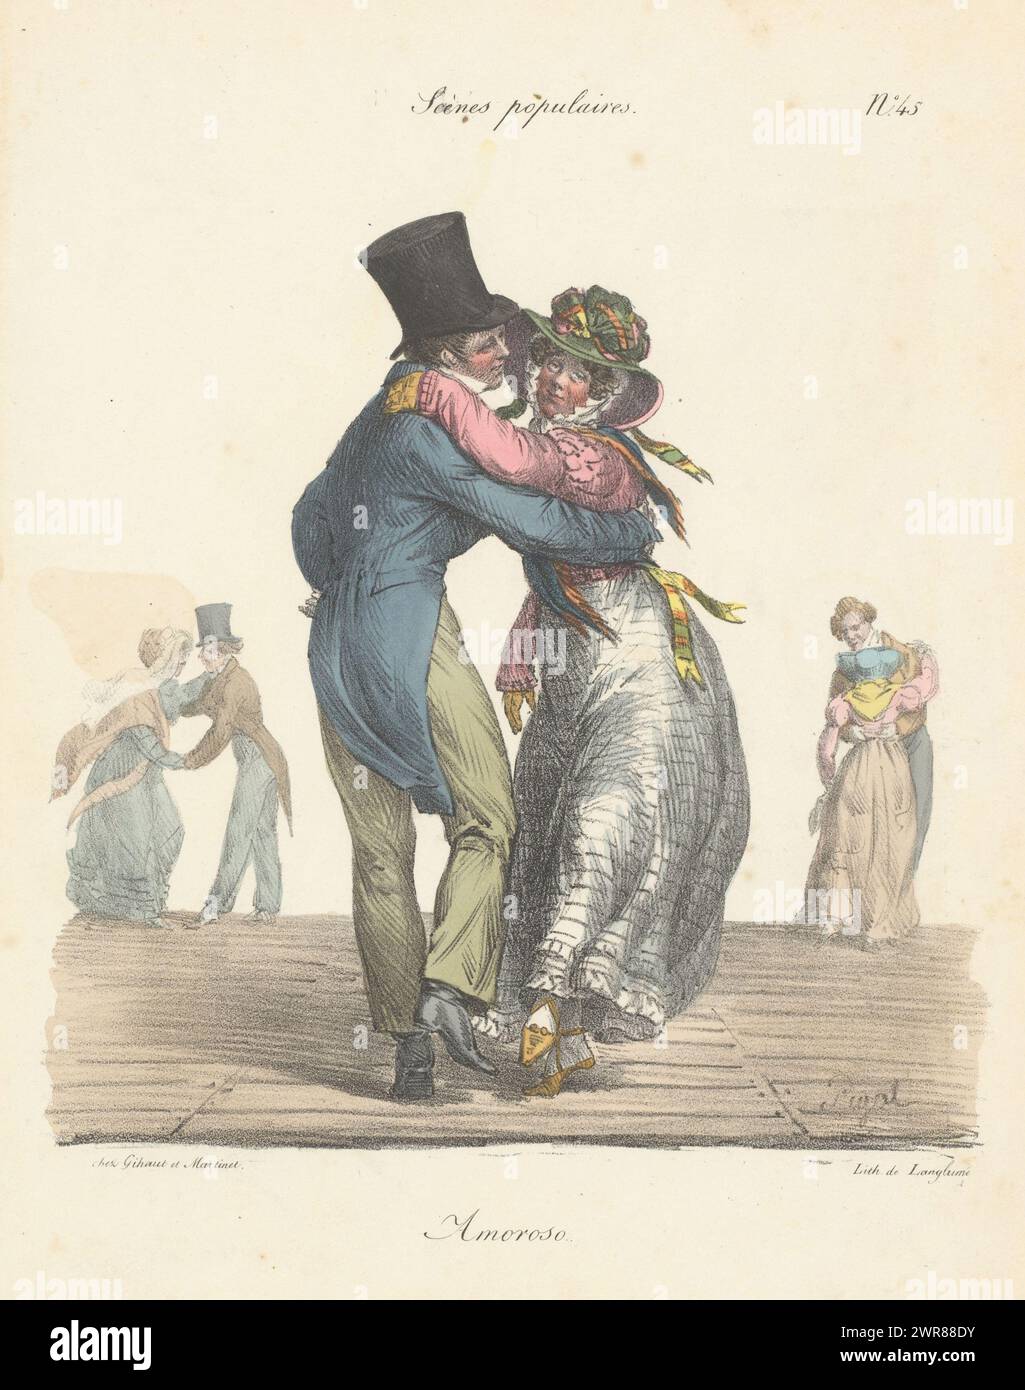 Dancing couple on dance floor, Amoroso (title on object), Incidents among the people (series title), Scènespopulars (series title on object), print maker: Edme Jean Pigal, printer: Pierre Langlumé, publisher: Gihaut et Martinet, Paris, 1824, paper, height 334 mm × width 240 mm, print Stock Photo